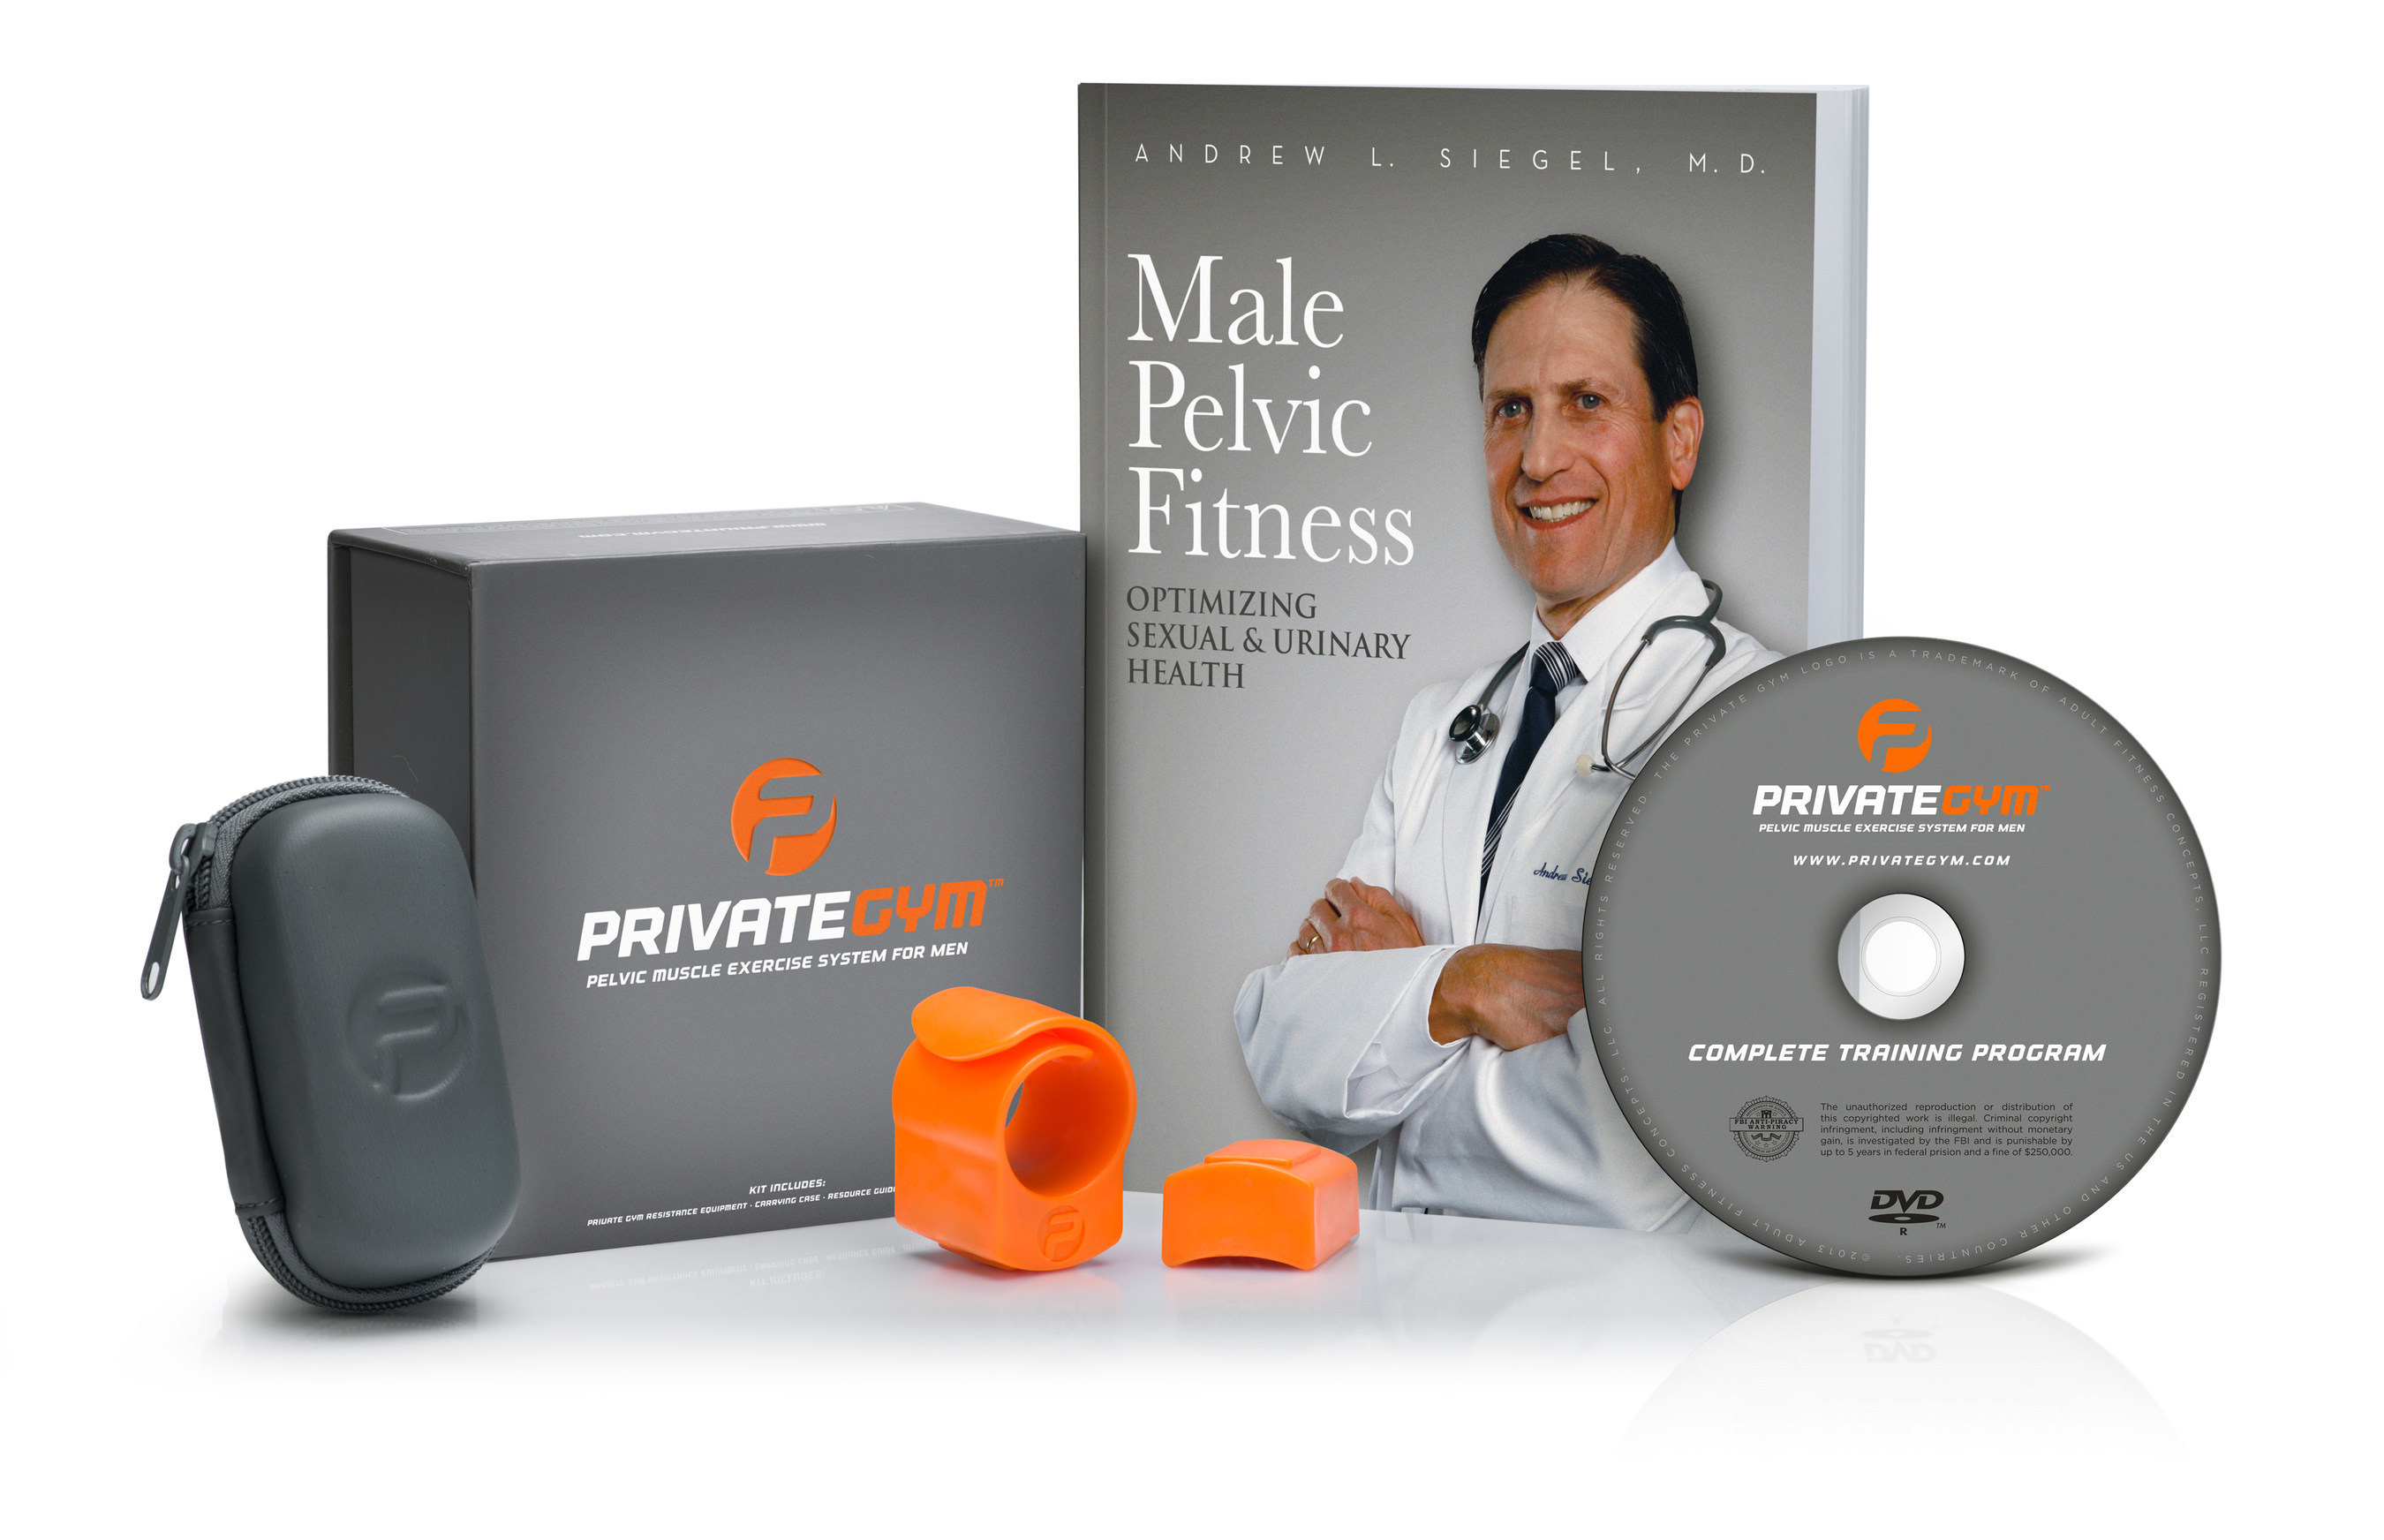 The Private Gym Complete Training Program